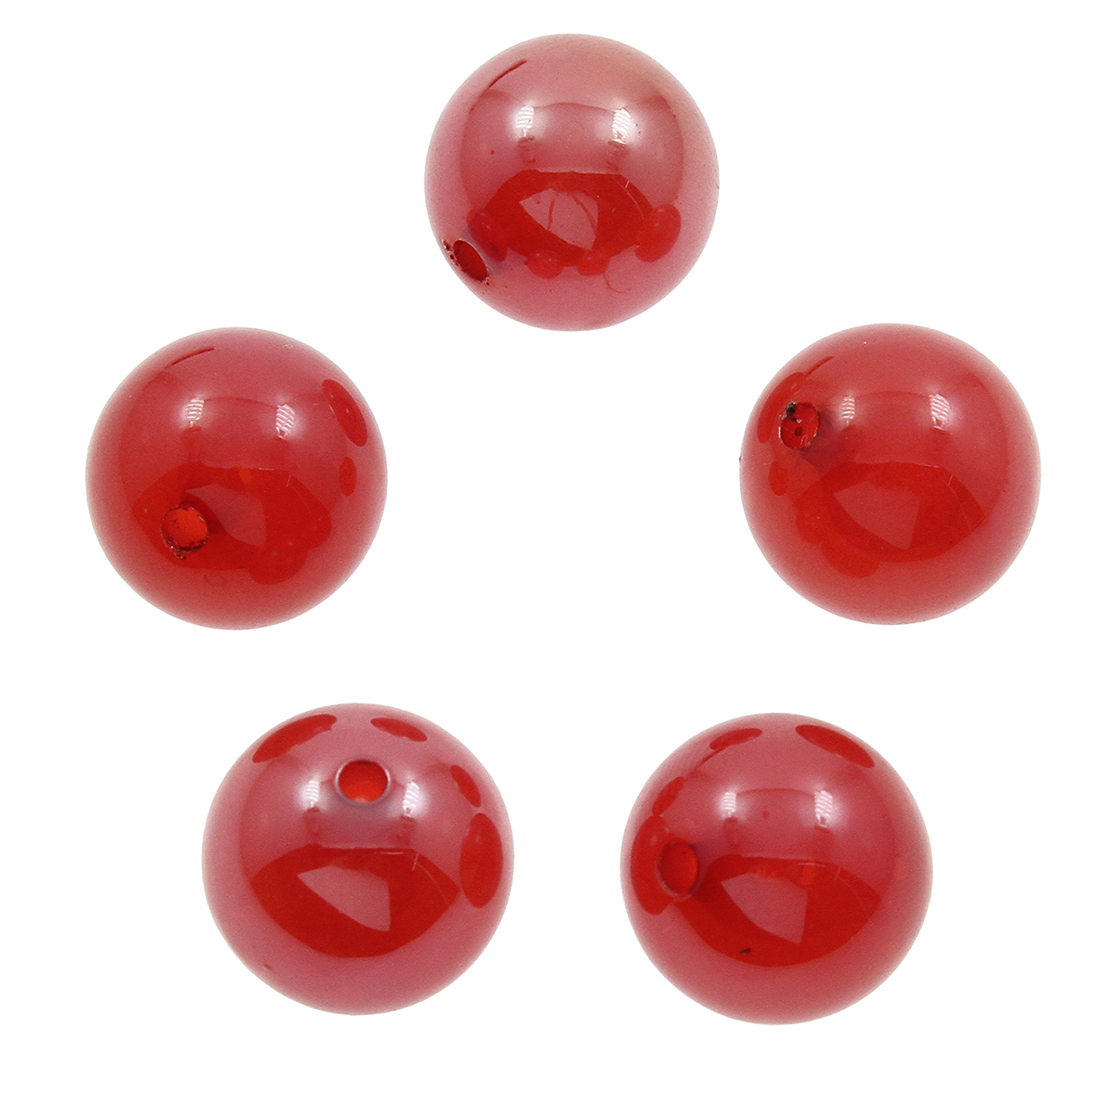 2 red